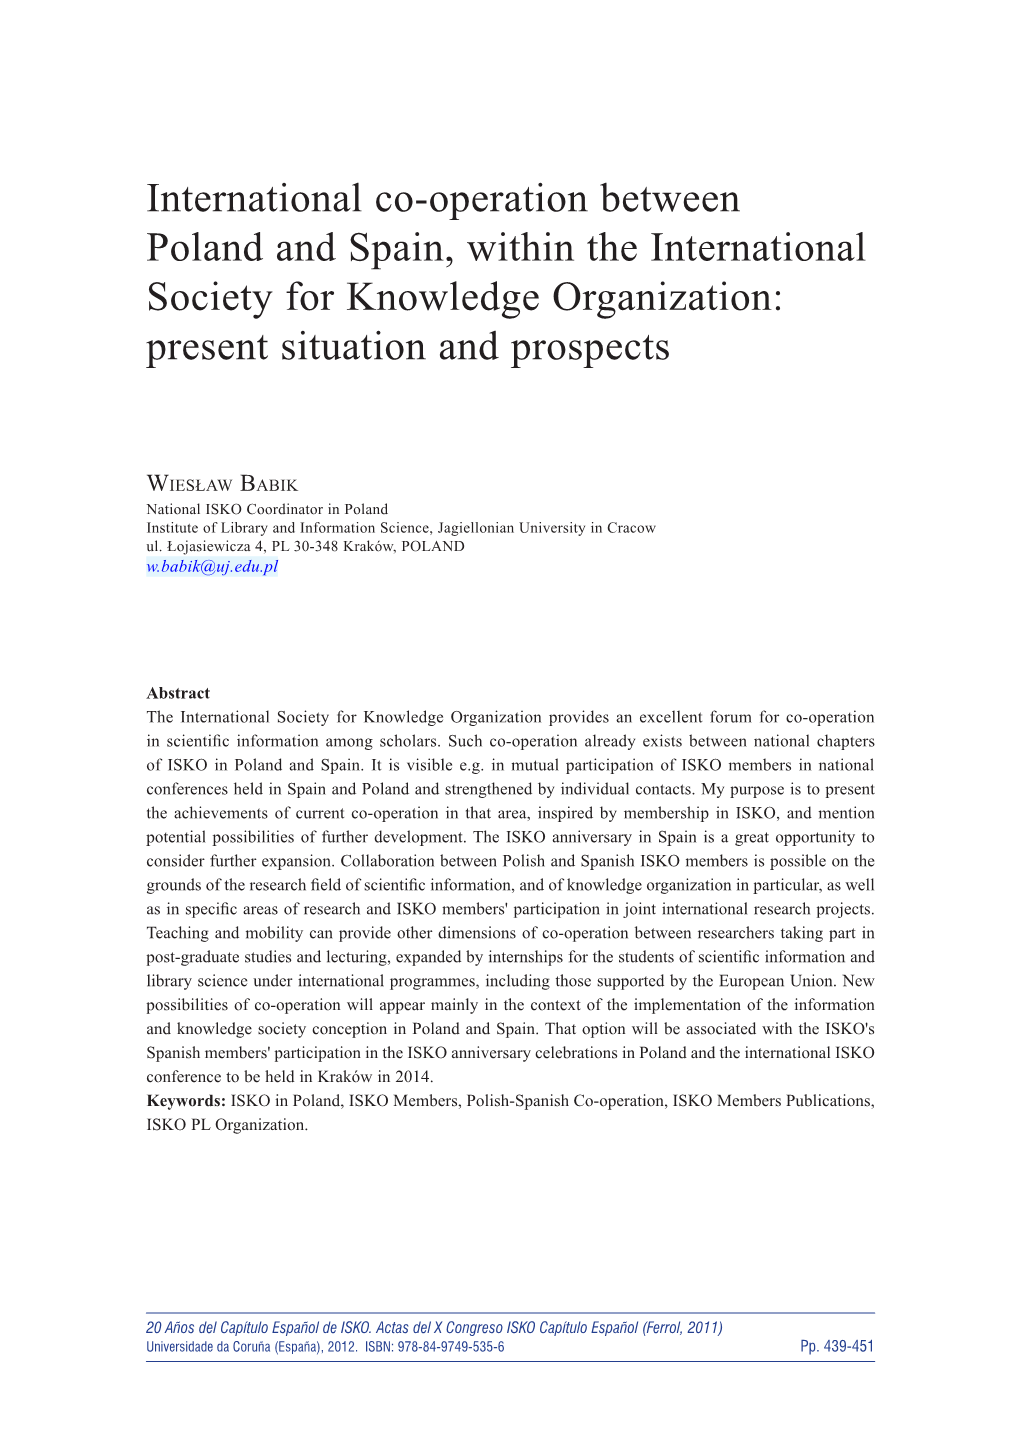 International Co-Operation Between Poland and Spain, Within the International Society for Knowledge Organization: Present Situation and Prospects